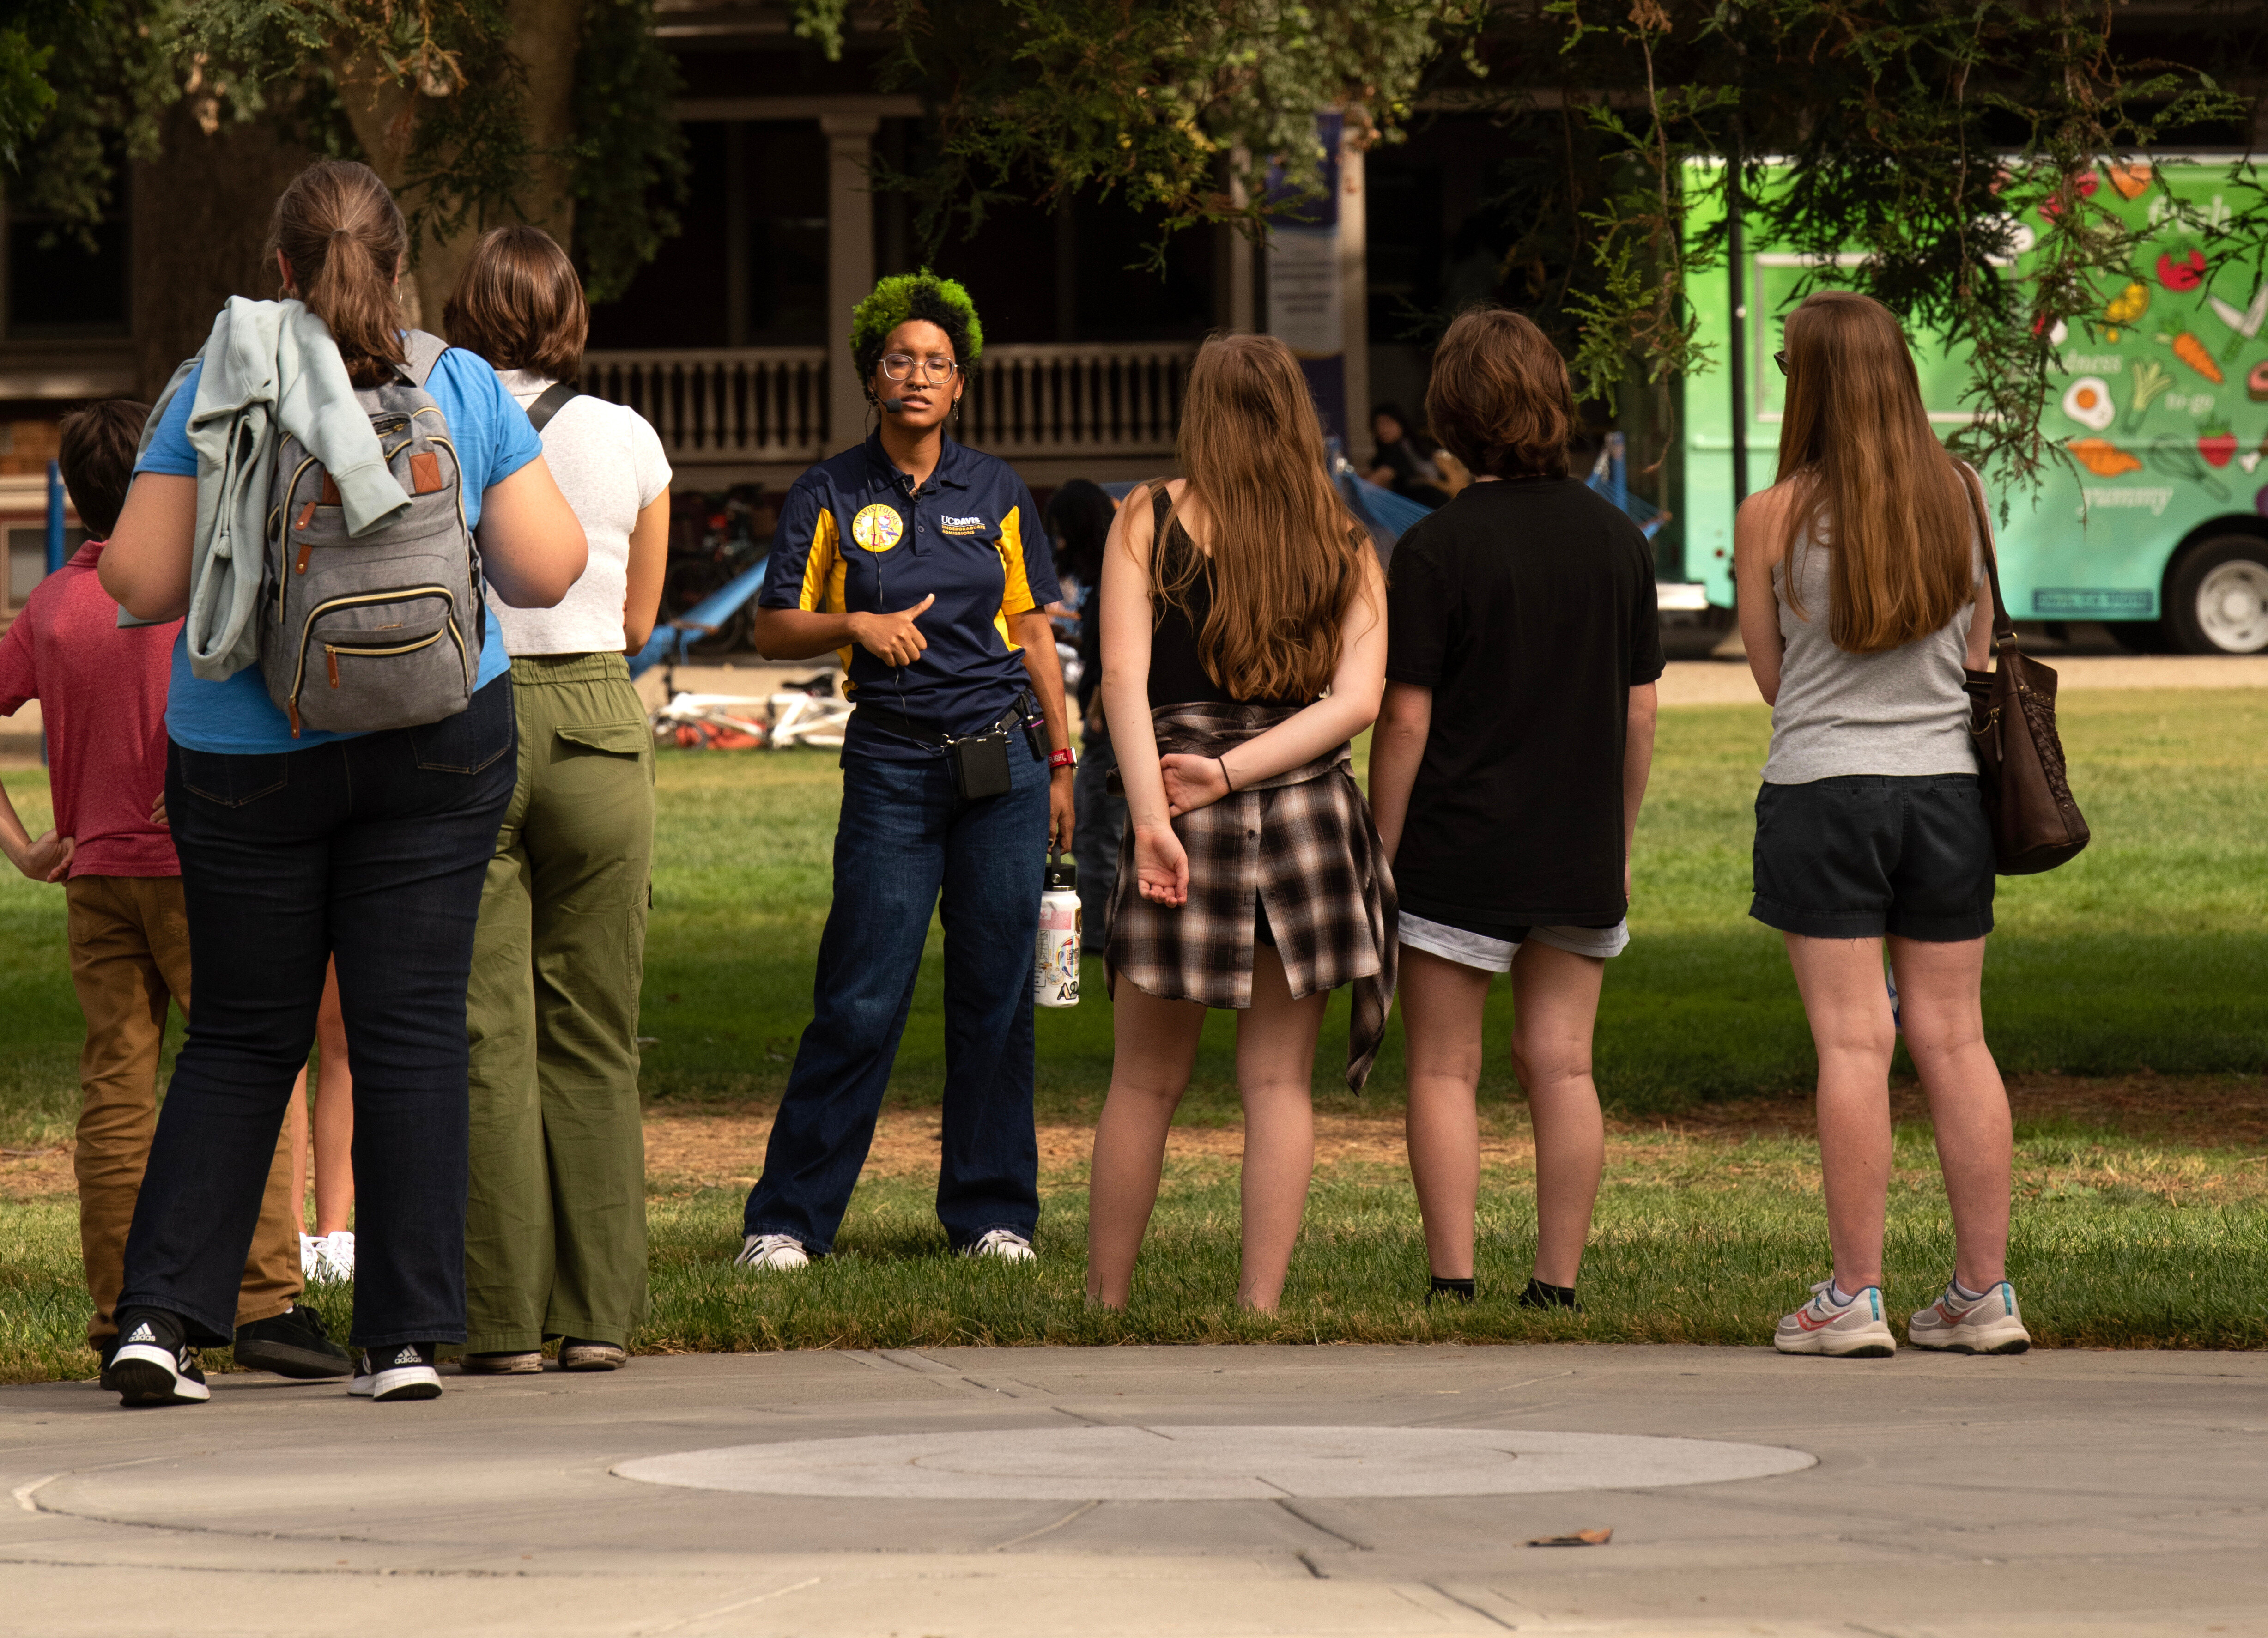 A student tour guide employee gives a tour through campus.